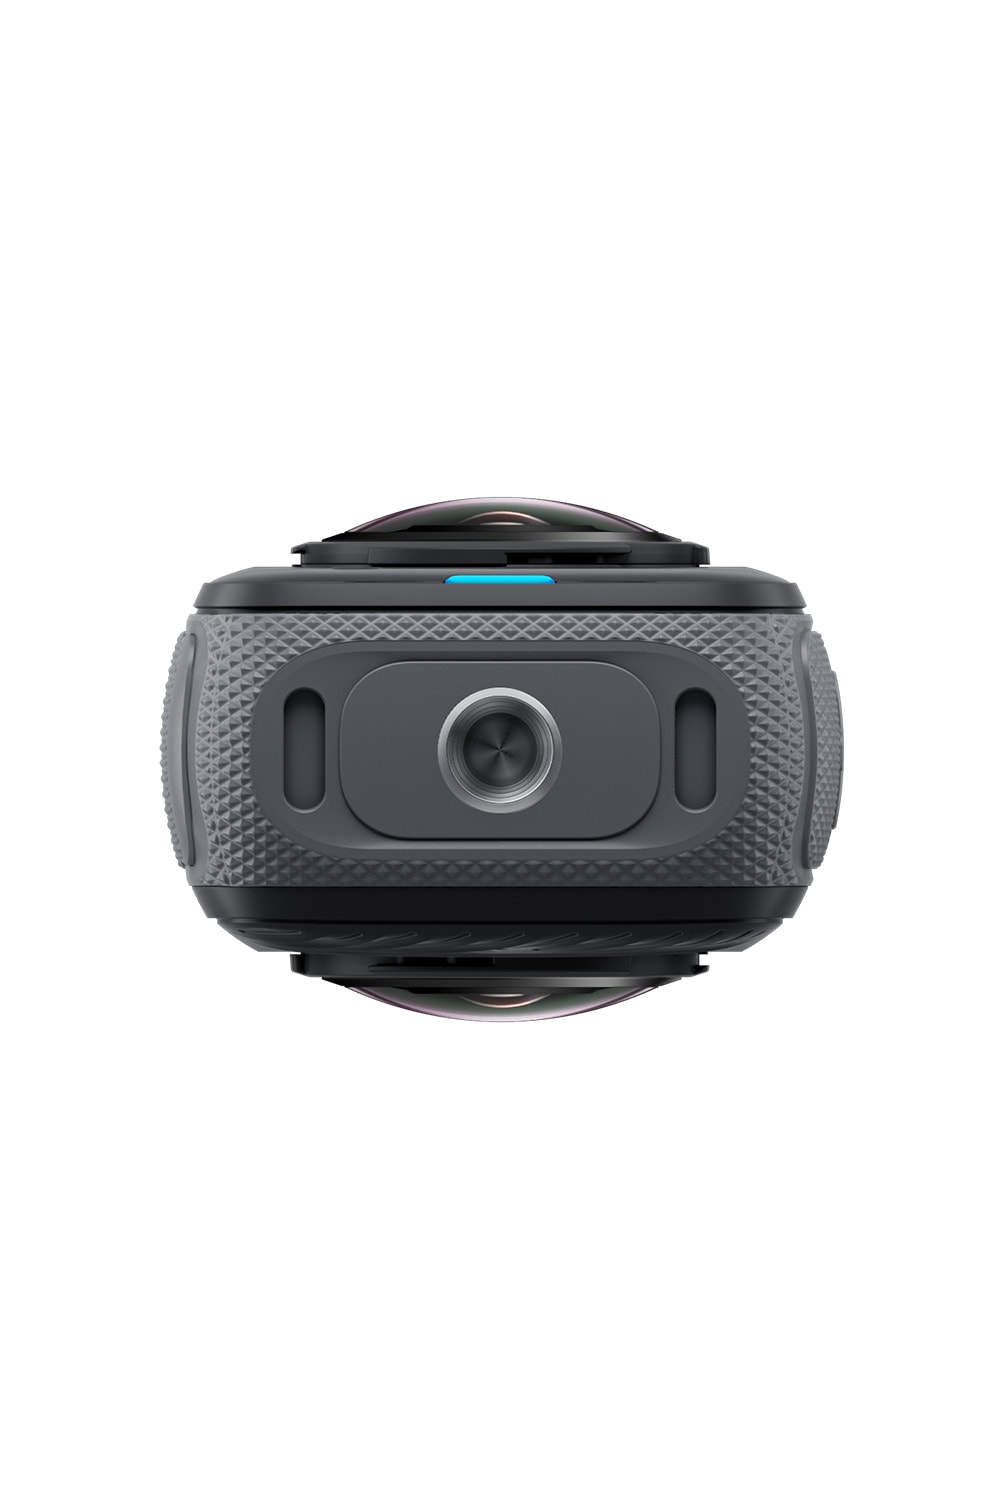 Insta360 Announces 'X4' Action Camera Capable of 8K 360° Video GoPro